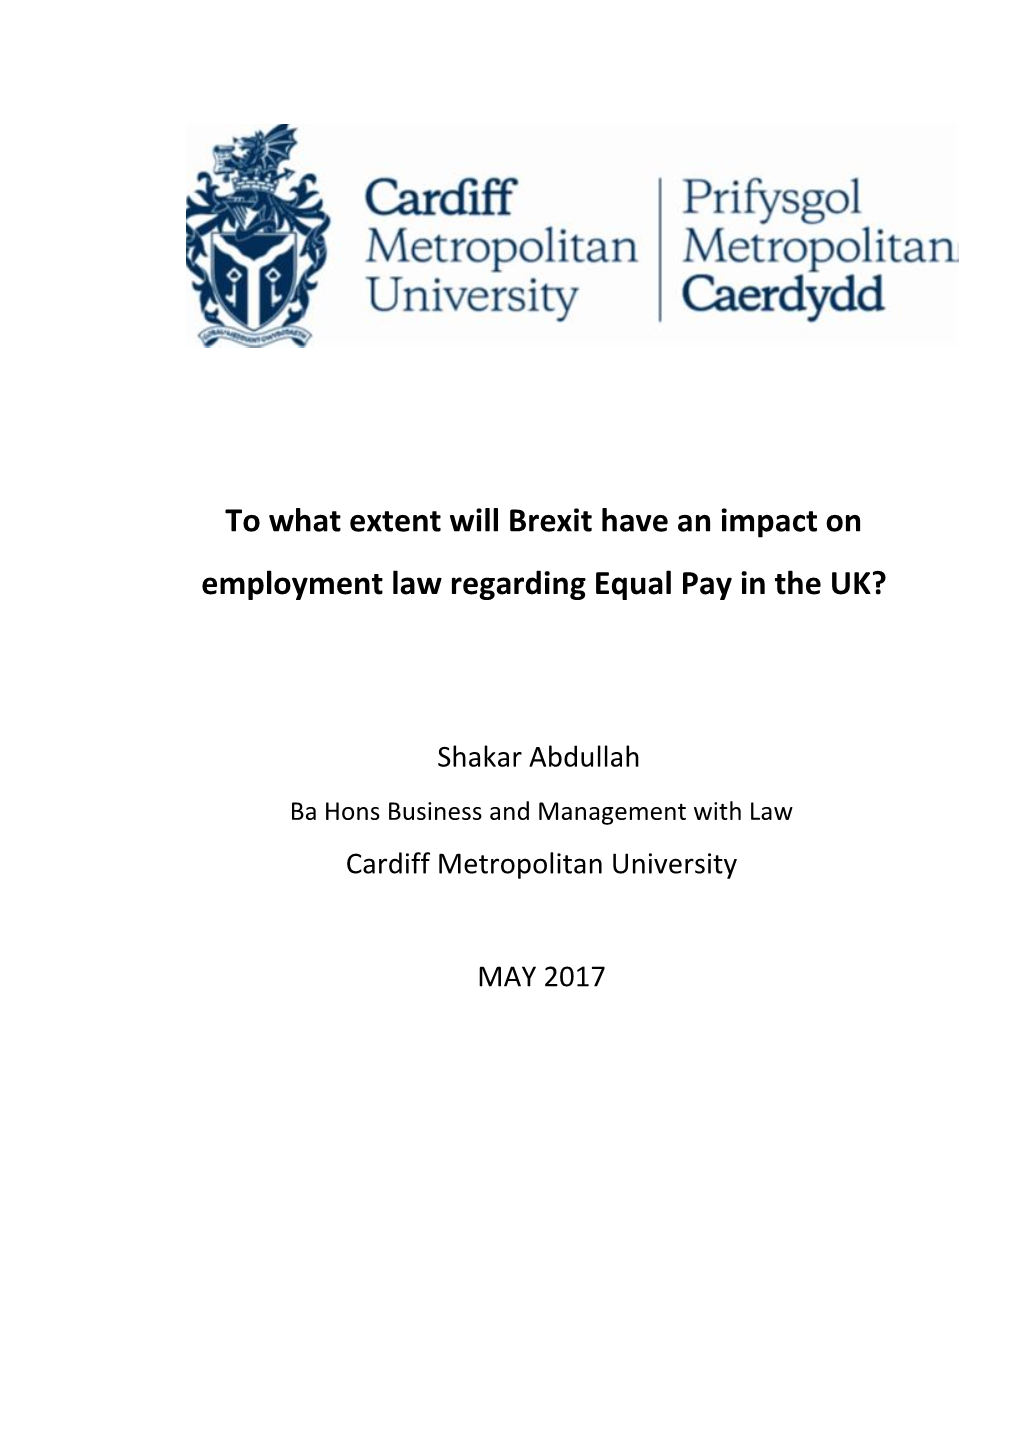 To What Extent Will Brexit Have an Impact on Employment Law Regarding Equal Pay in the UK?